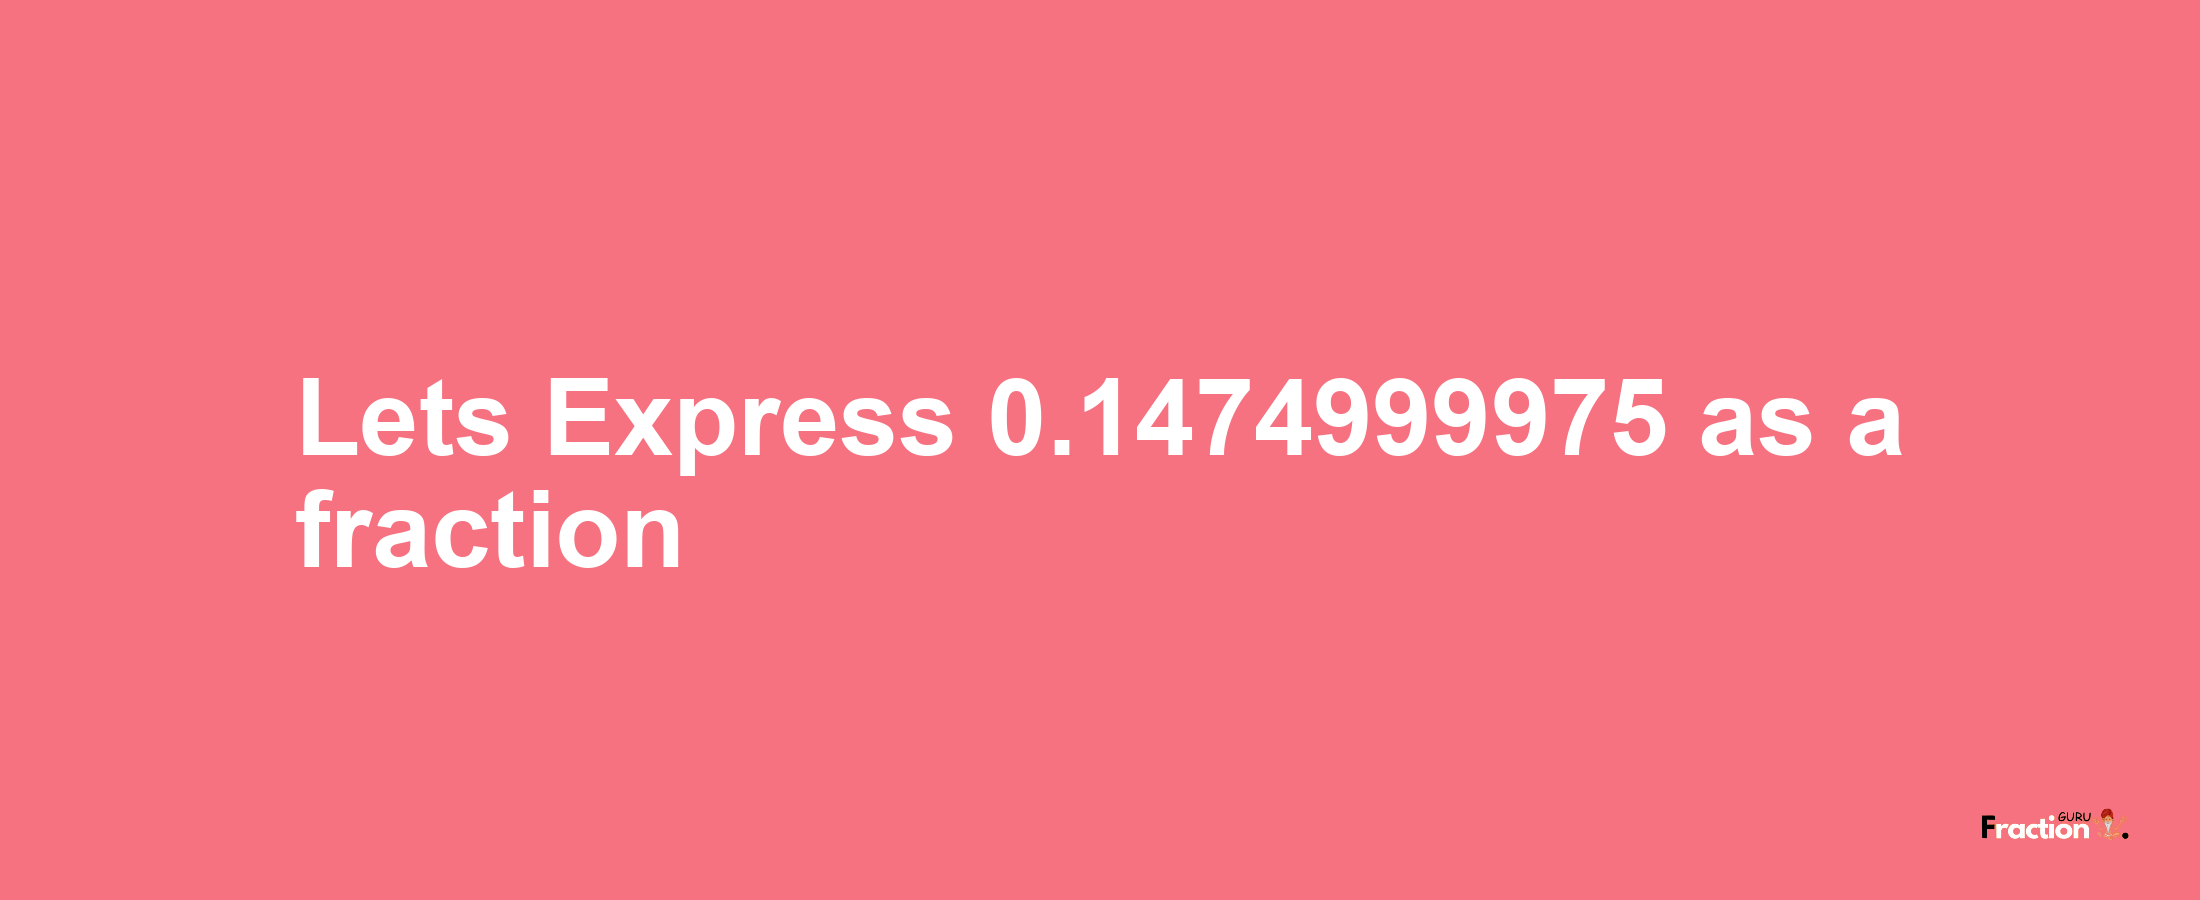 Lets Express 0.1474999975 as afraction